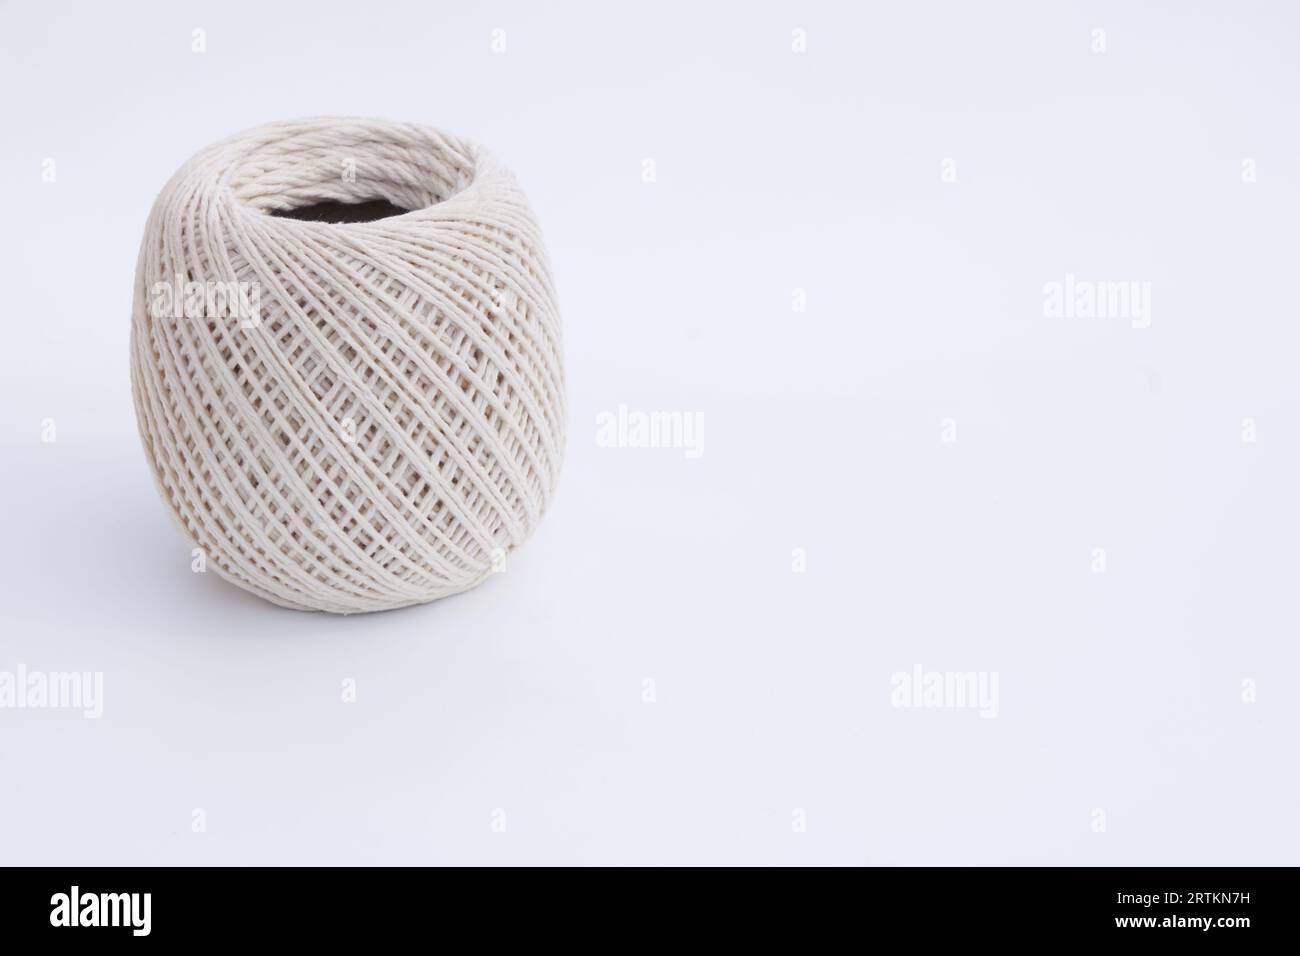 A ball of String isolated on a White background Stock Photo